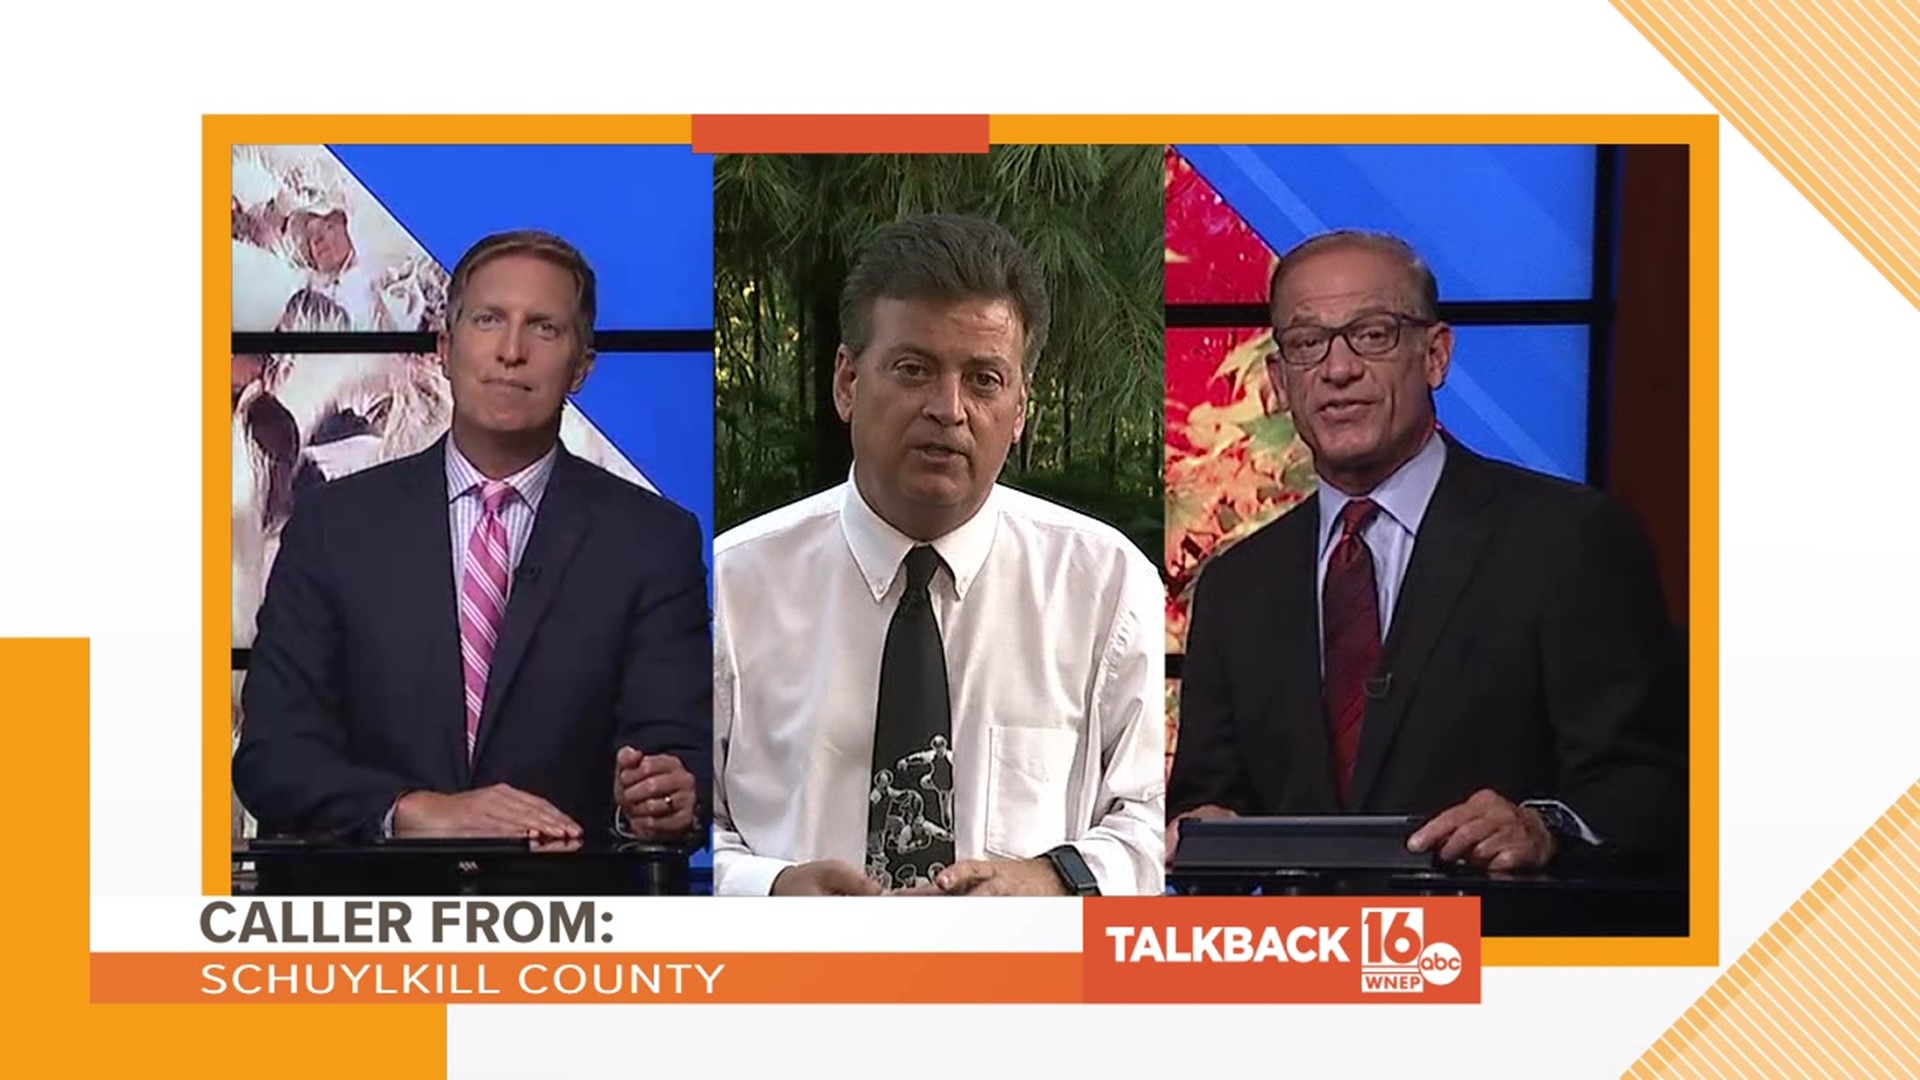 A caller compares three of WNEP's on-air talents to the classic comedy team.